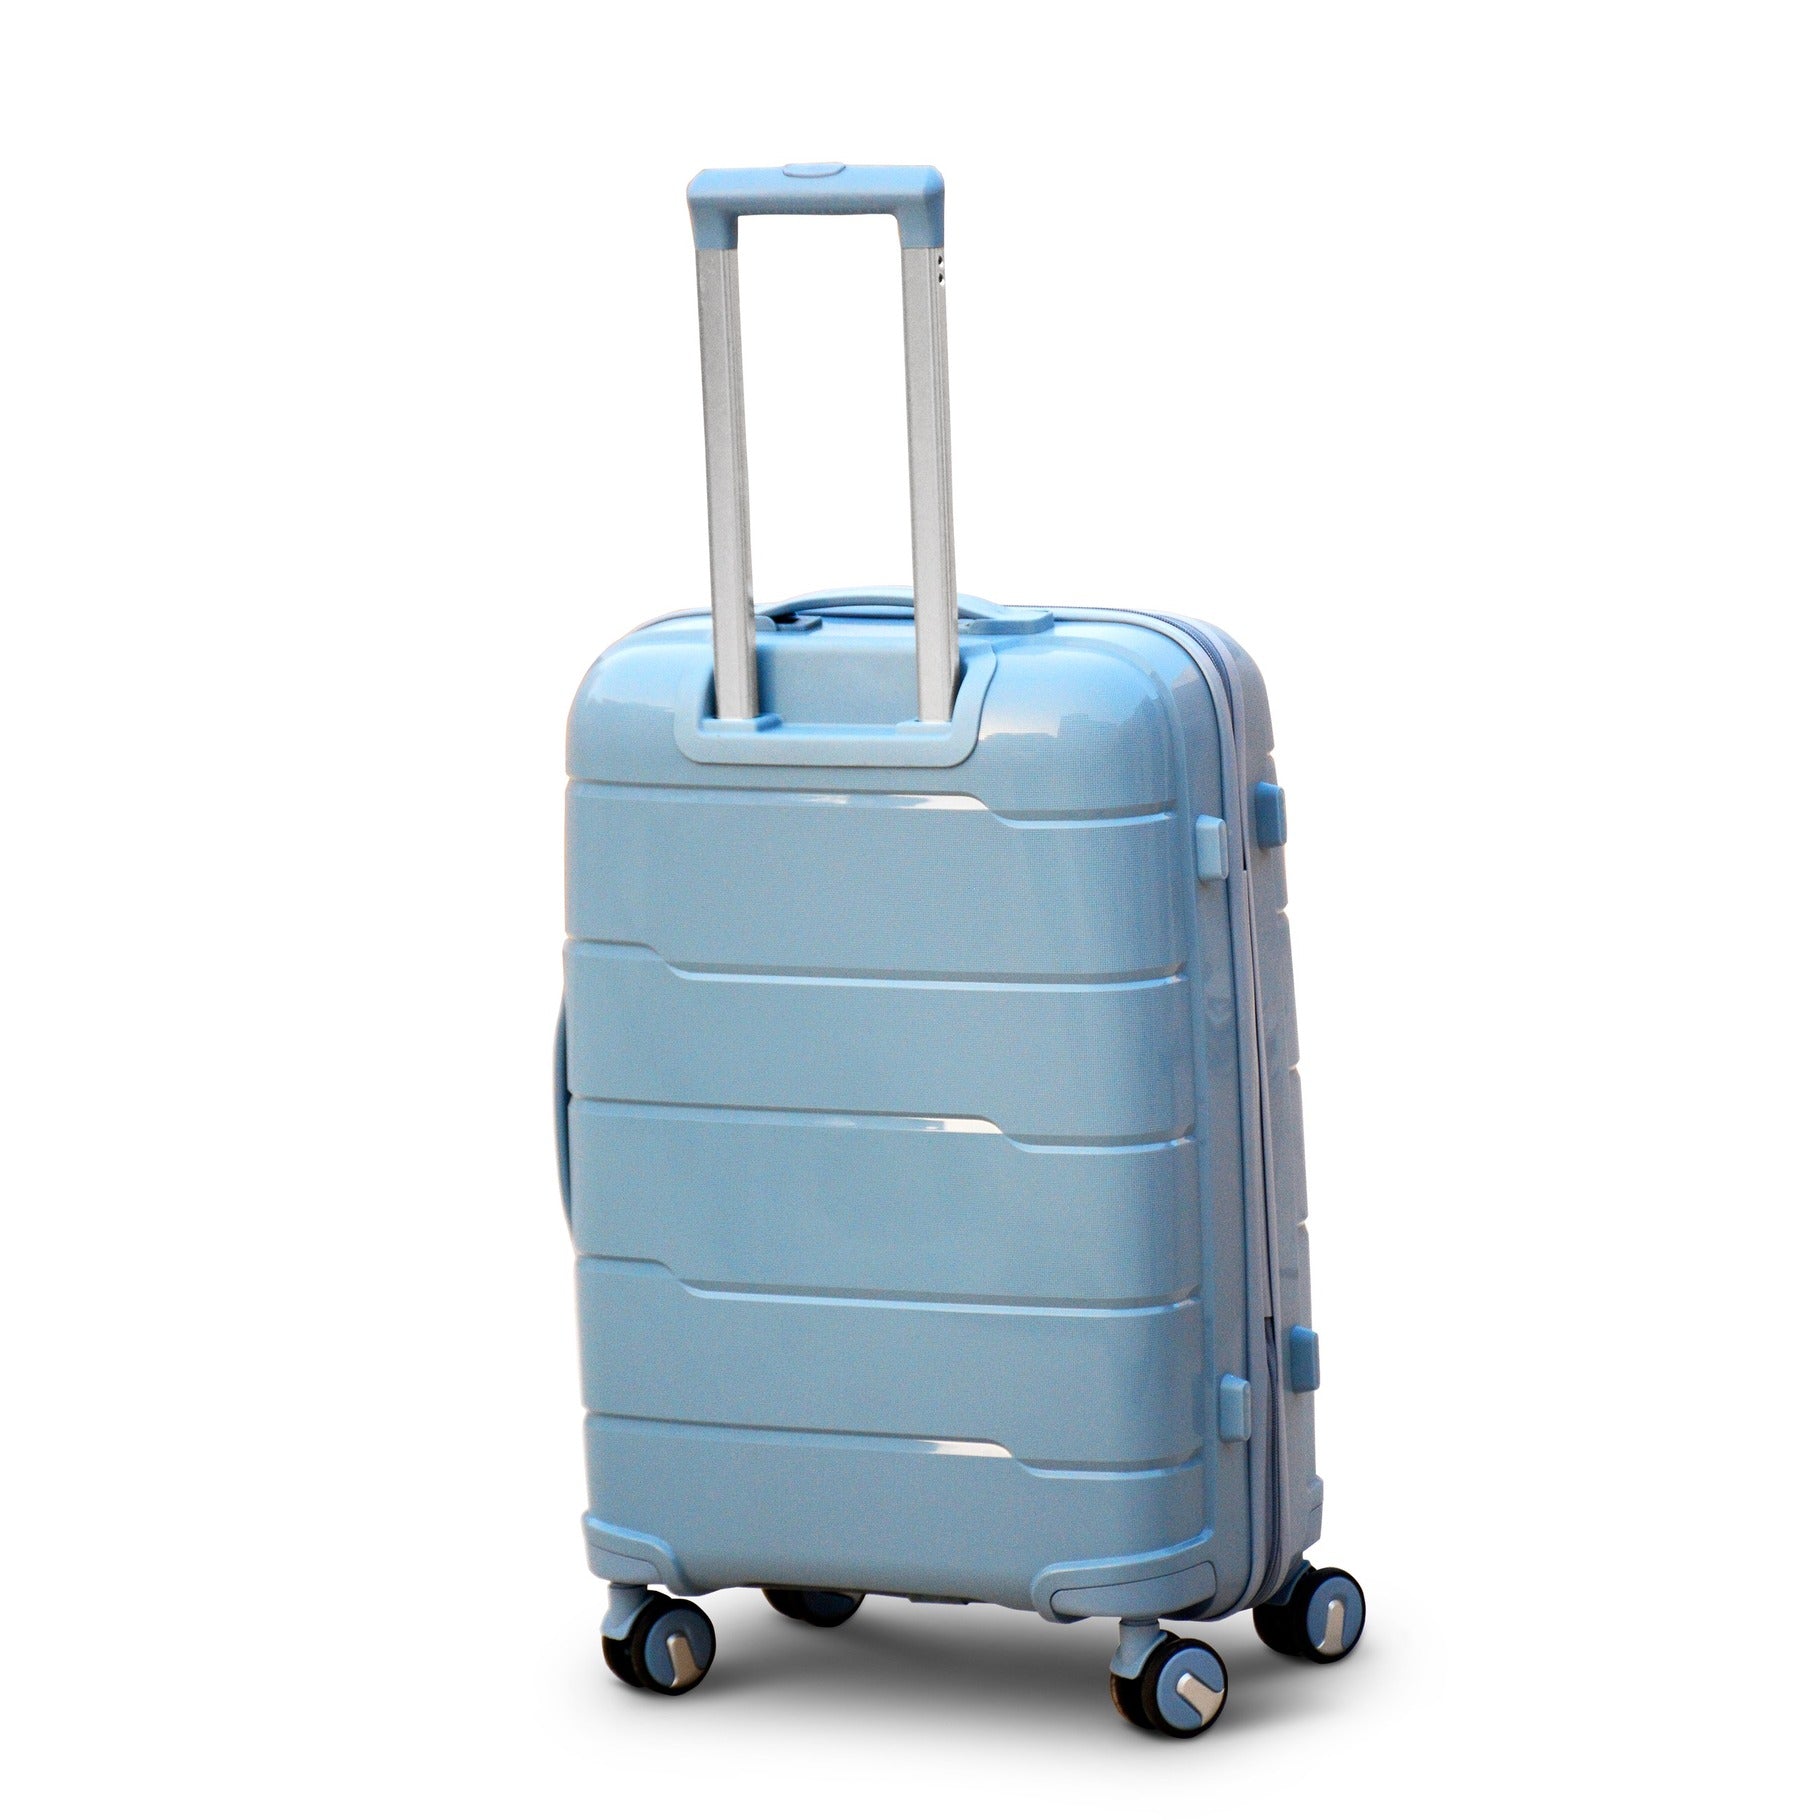 24" Grey Colour Non Expandable Ceramic PP Luggage Lightweight Hard Case Trolley Bag with Double Spinner Wheel